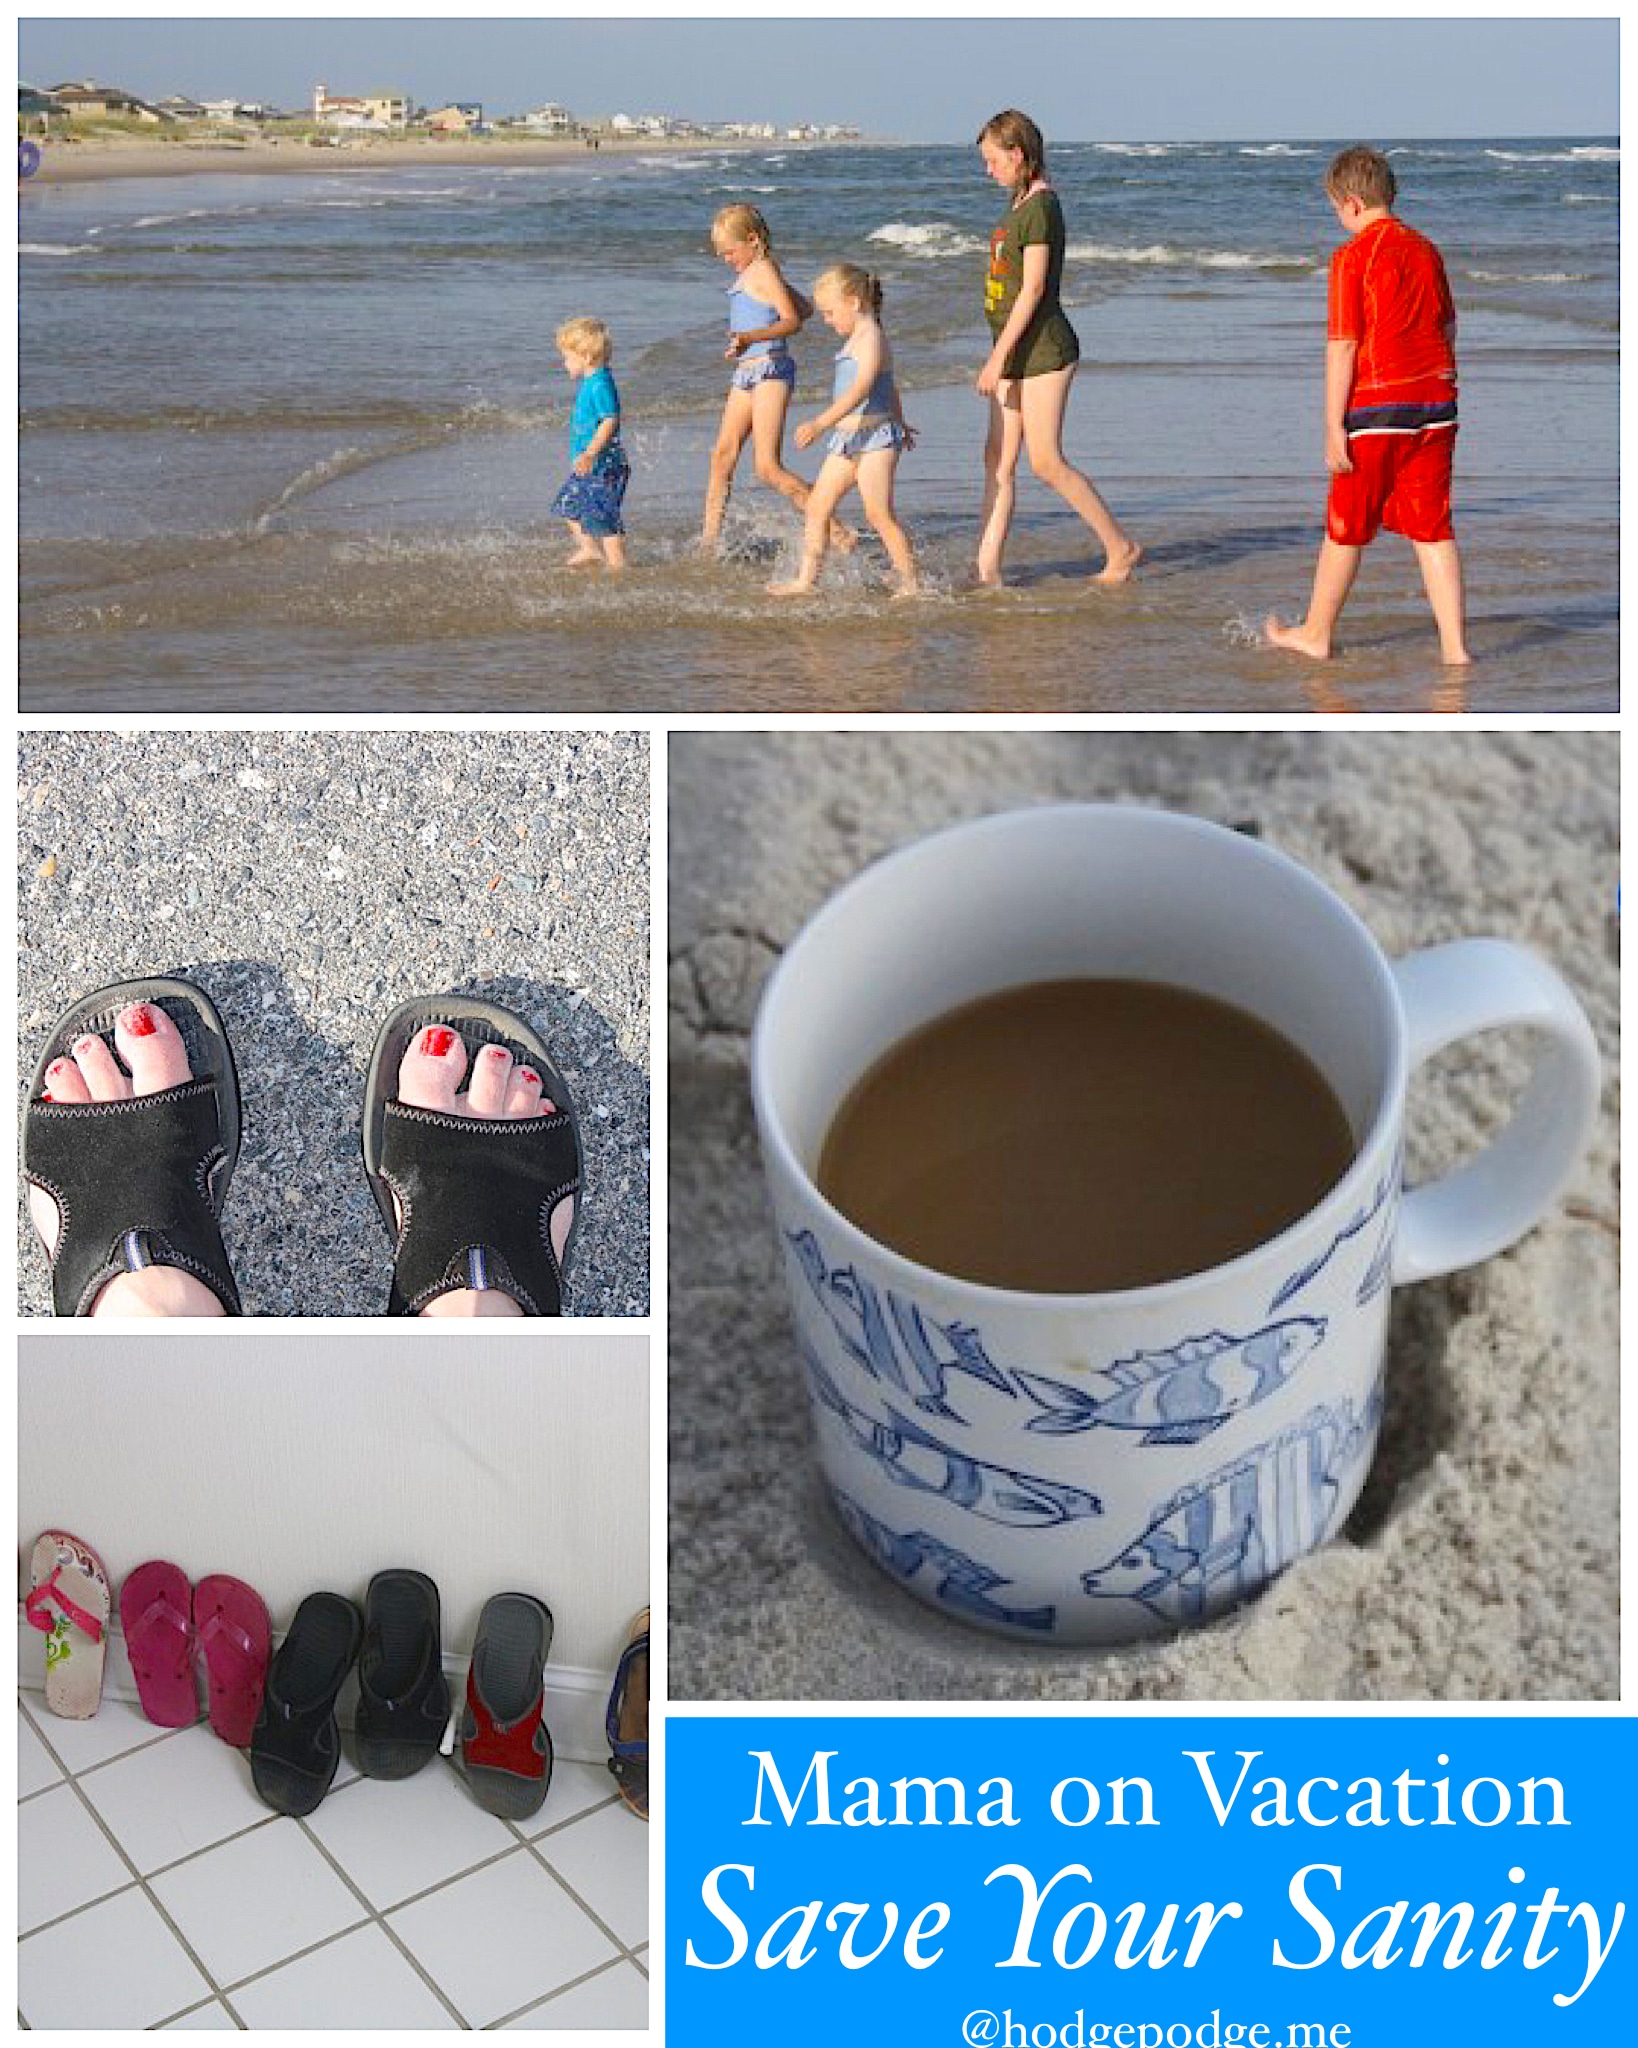 Mama on Vacation: Save Your Sanity